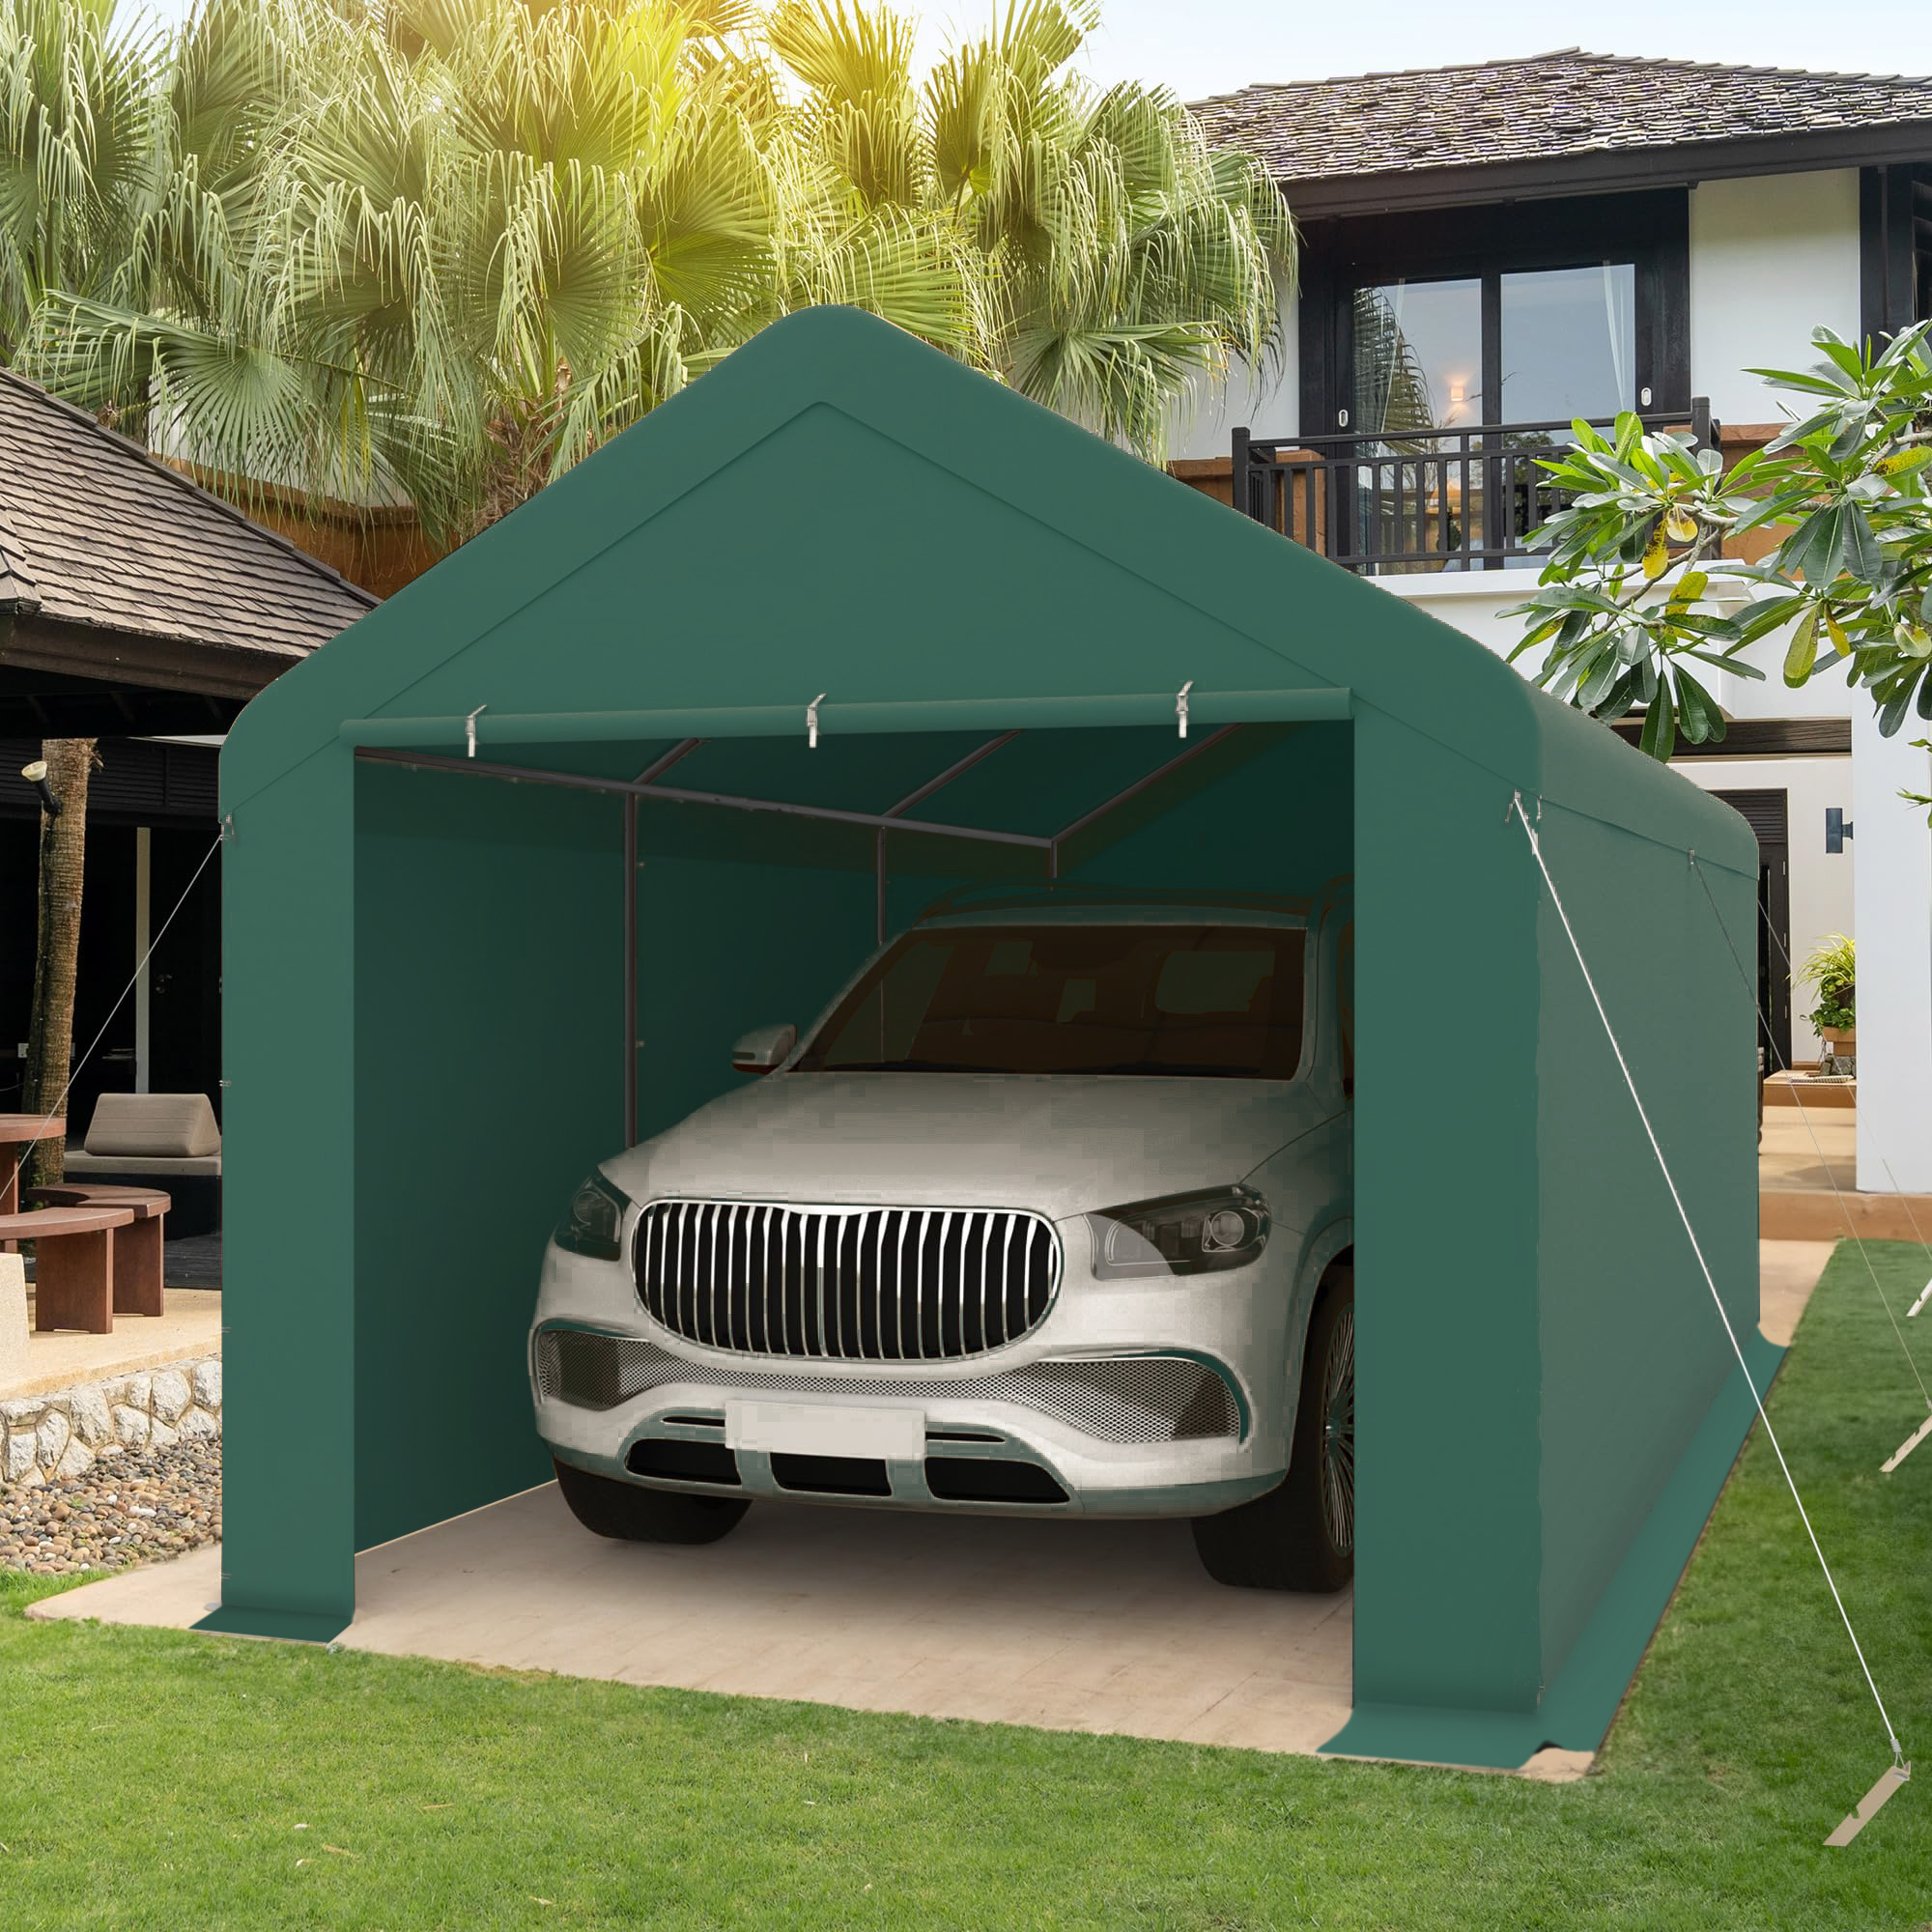 Grezjxc 10 x 20ft Steel Carport Heavy Duty Awning Car Canopy Tent with Side Walls for outdoor Truck Boat Car Port Party Storage (Green) - image 5 of 9